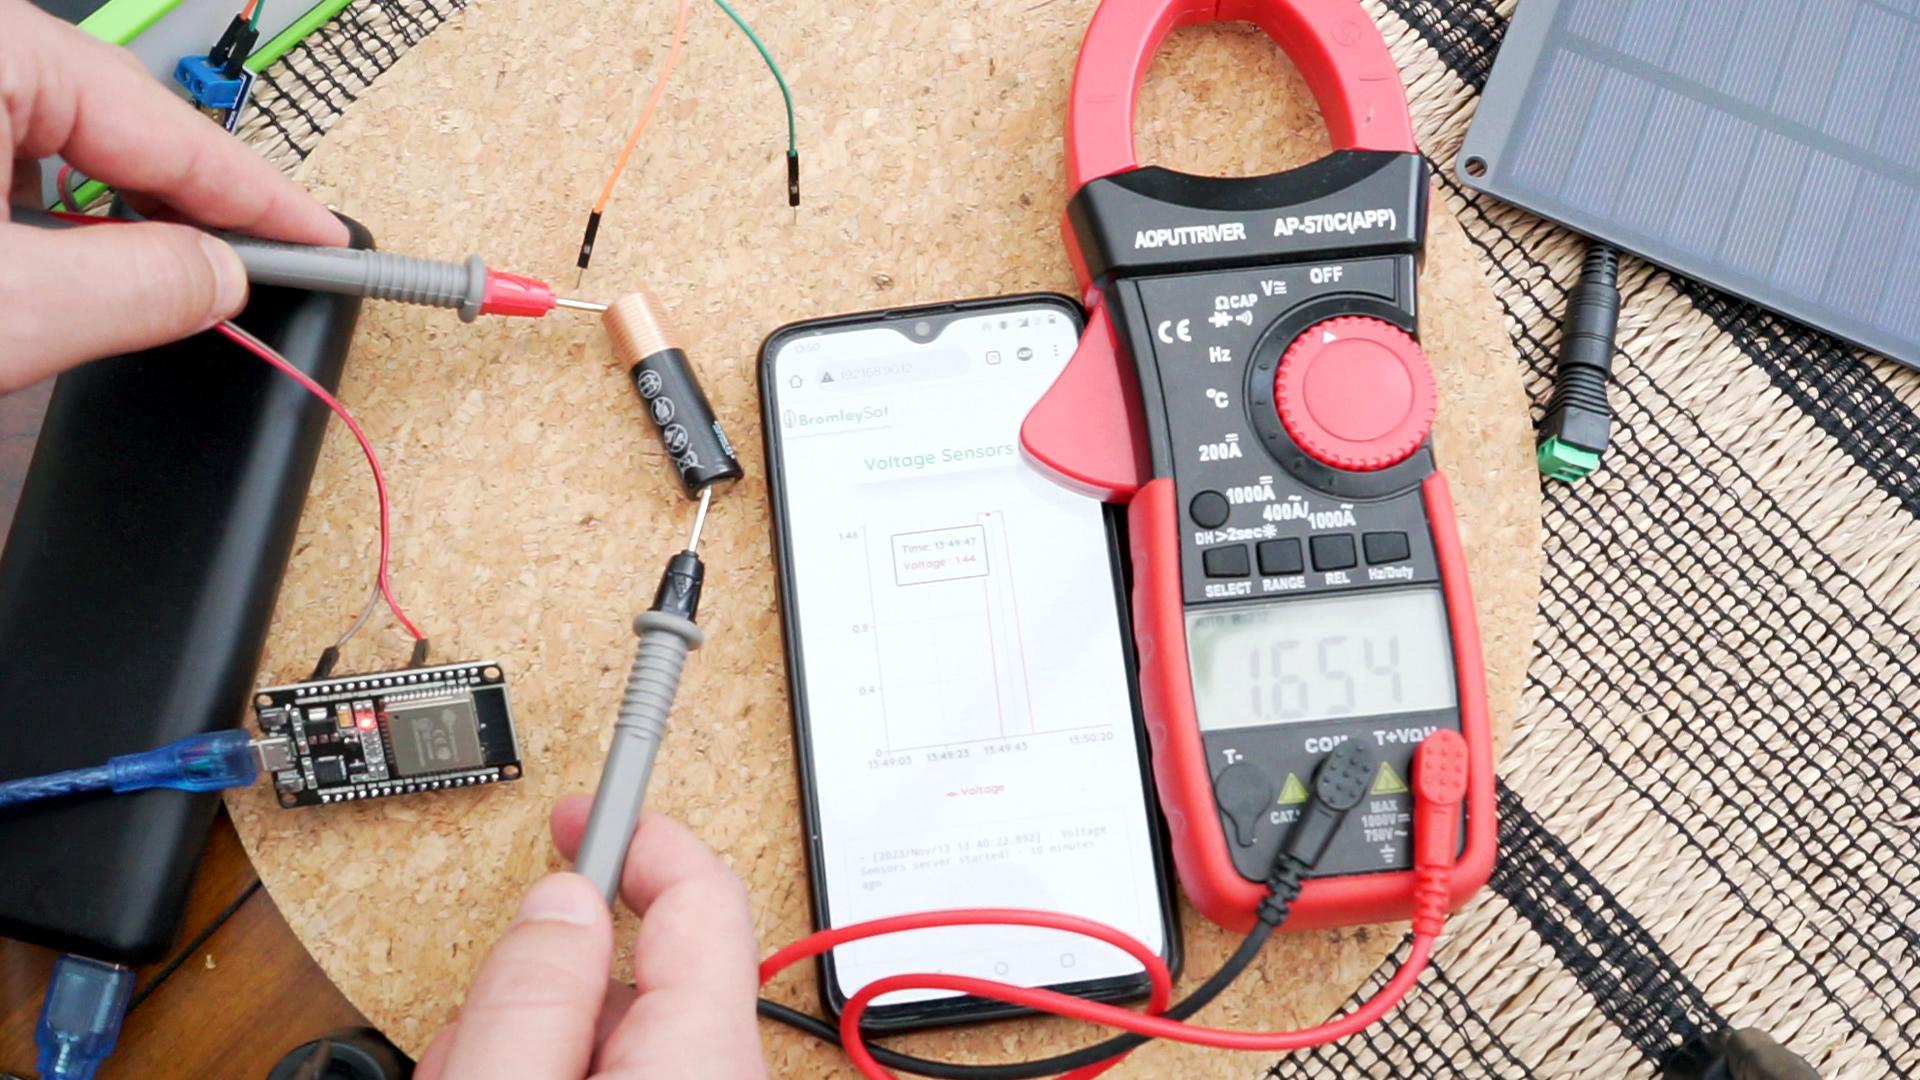 Measuring voltage with ESP32 and comparing to the multimeter reading